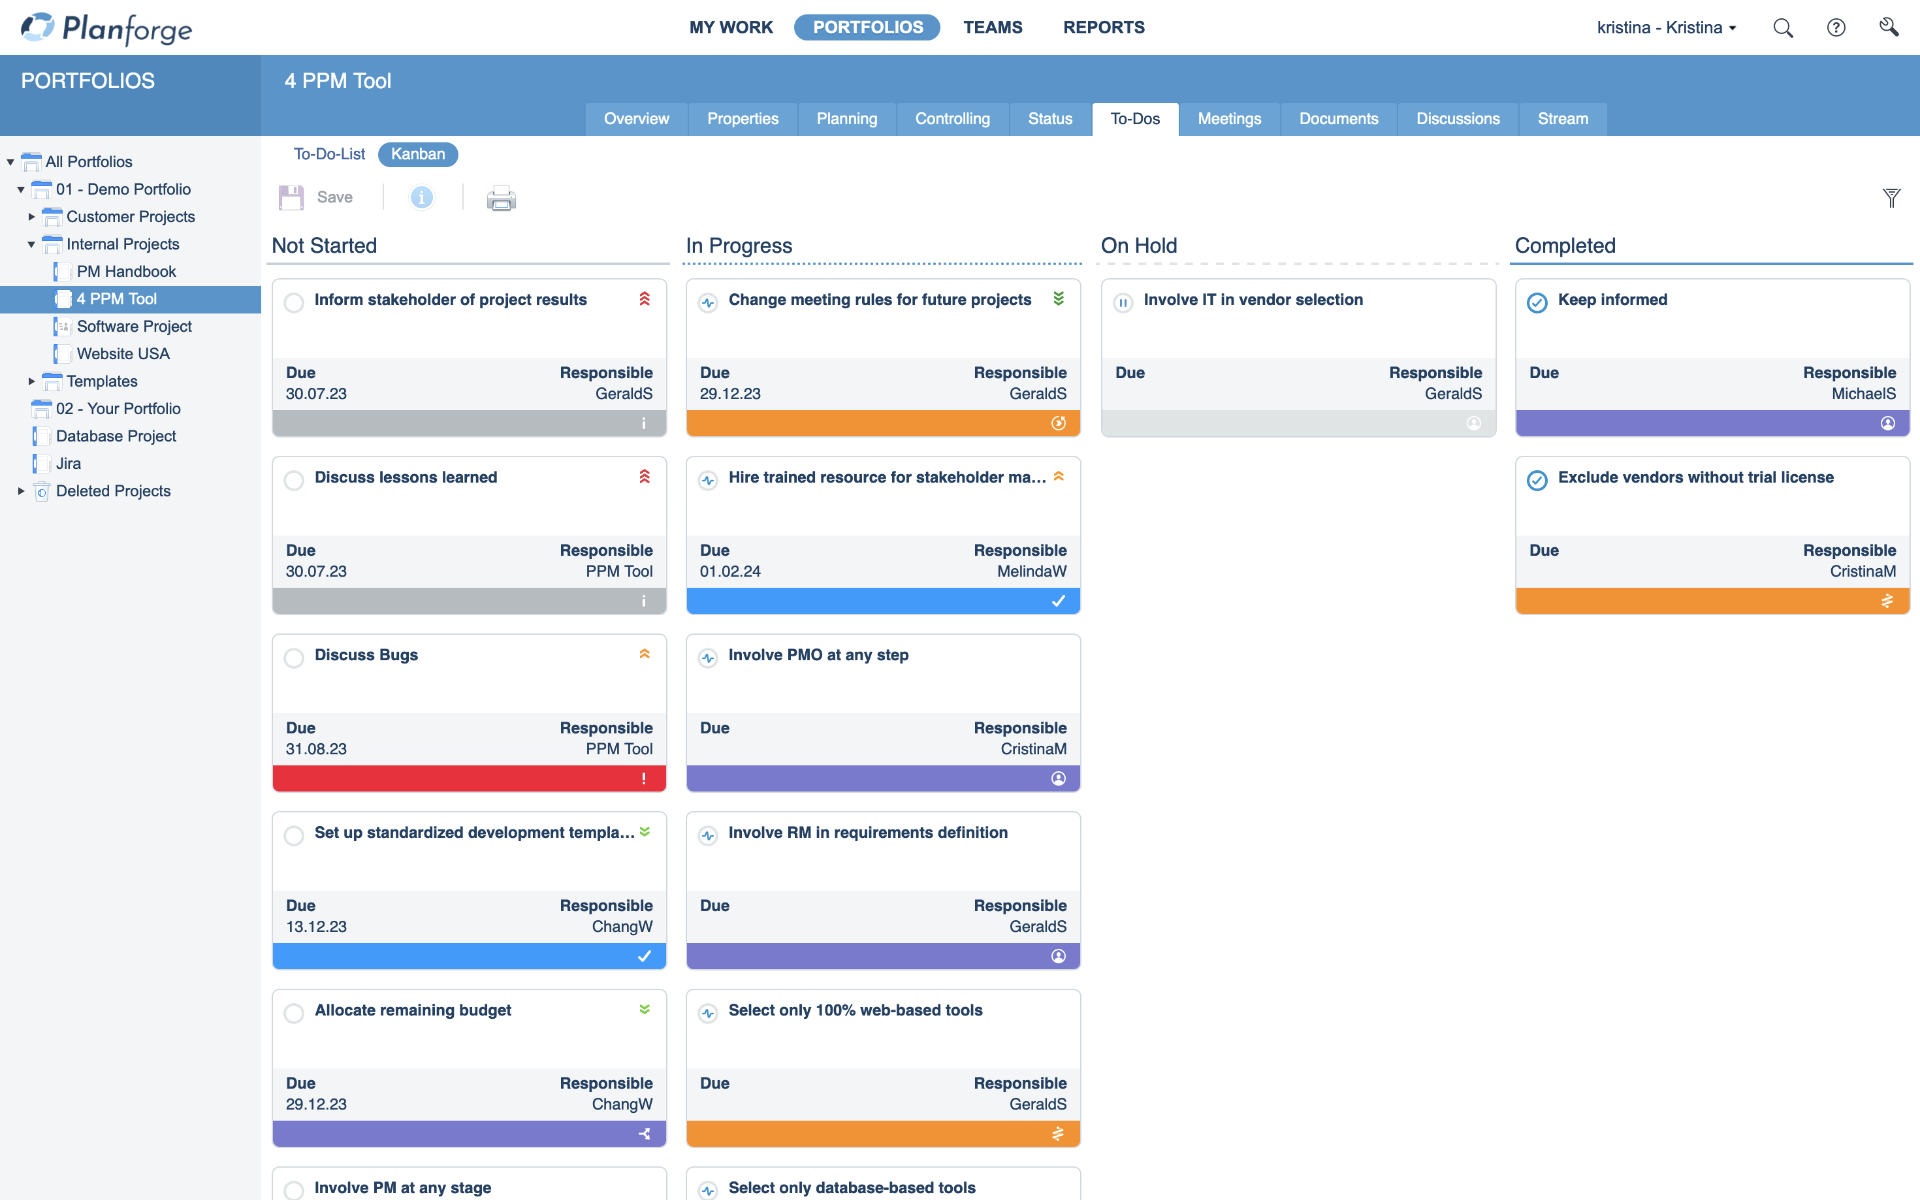 Kanban Board in project management software by Planforge